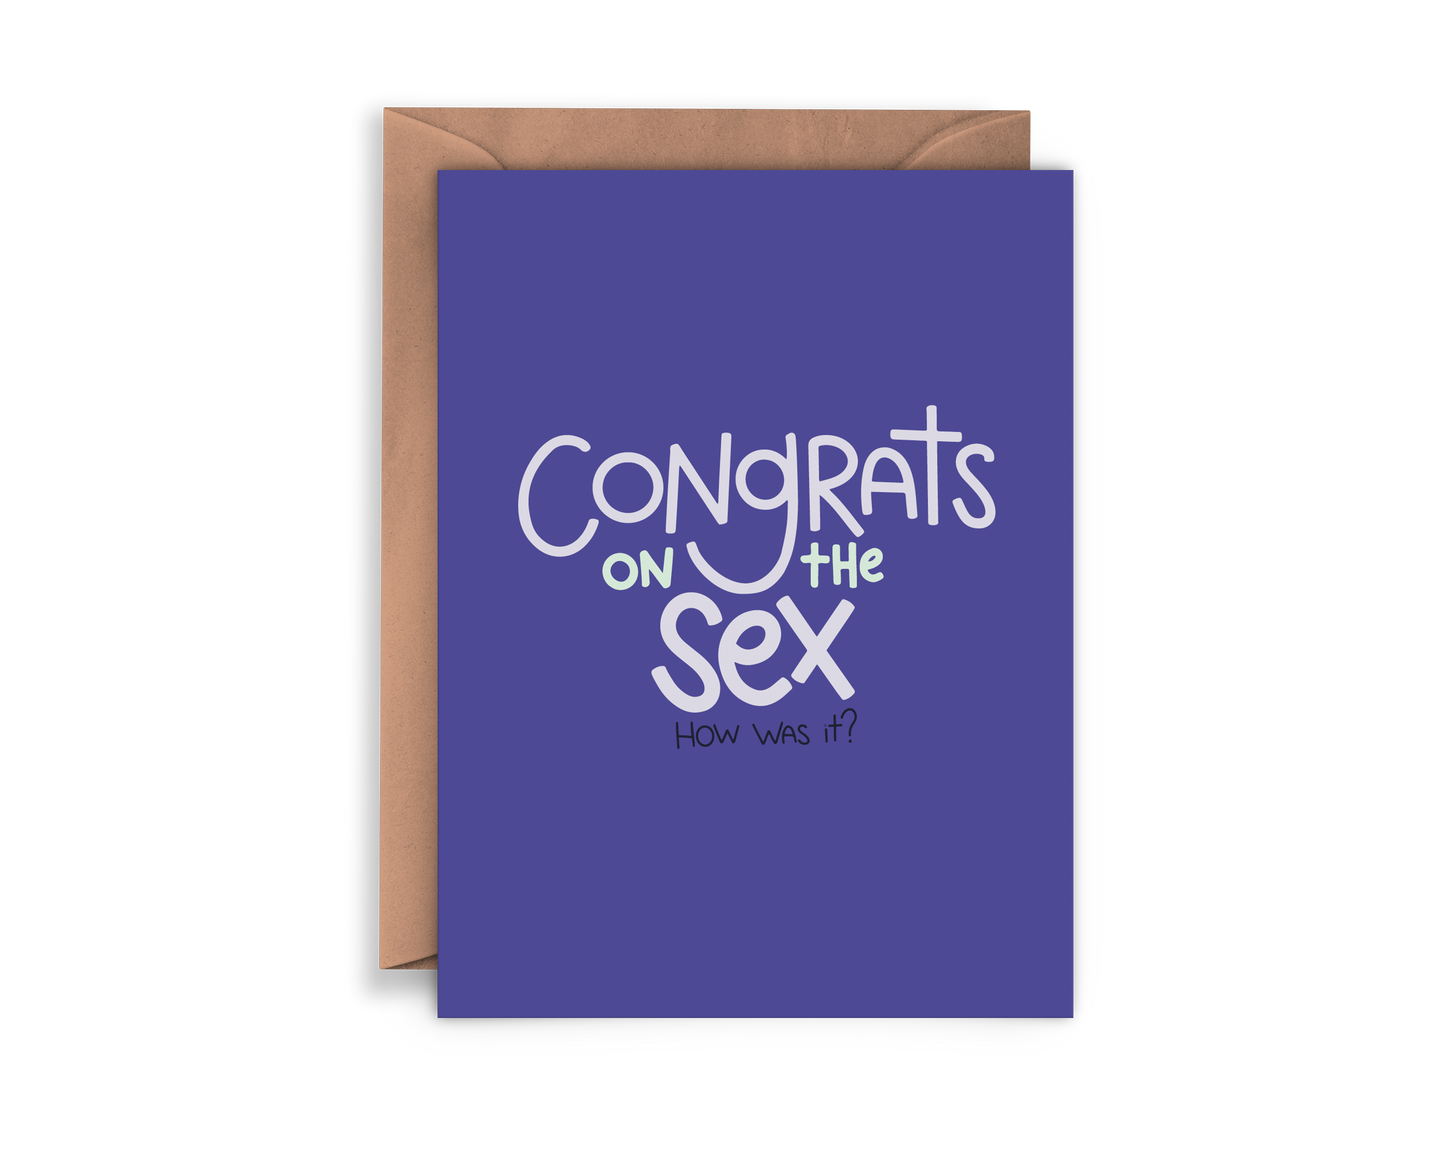 Congrats on the Sex